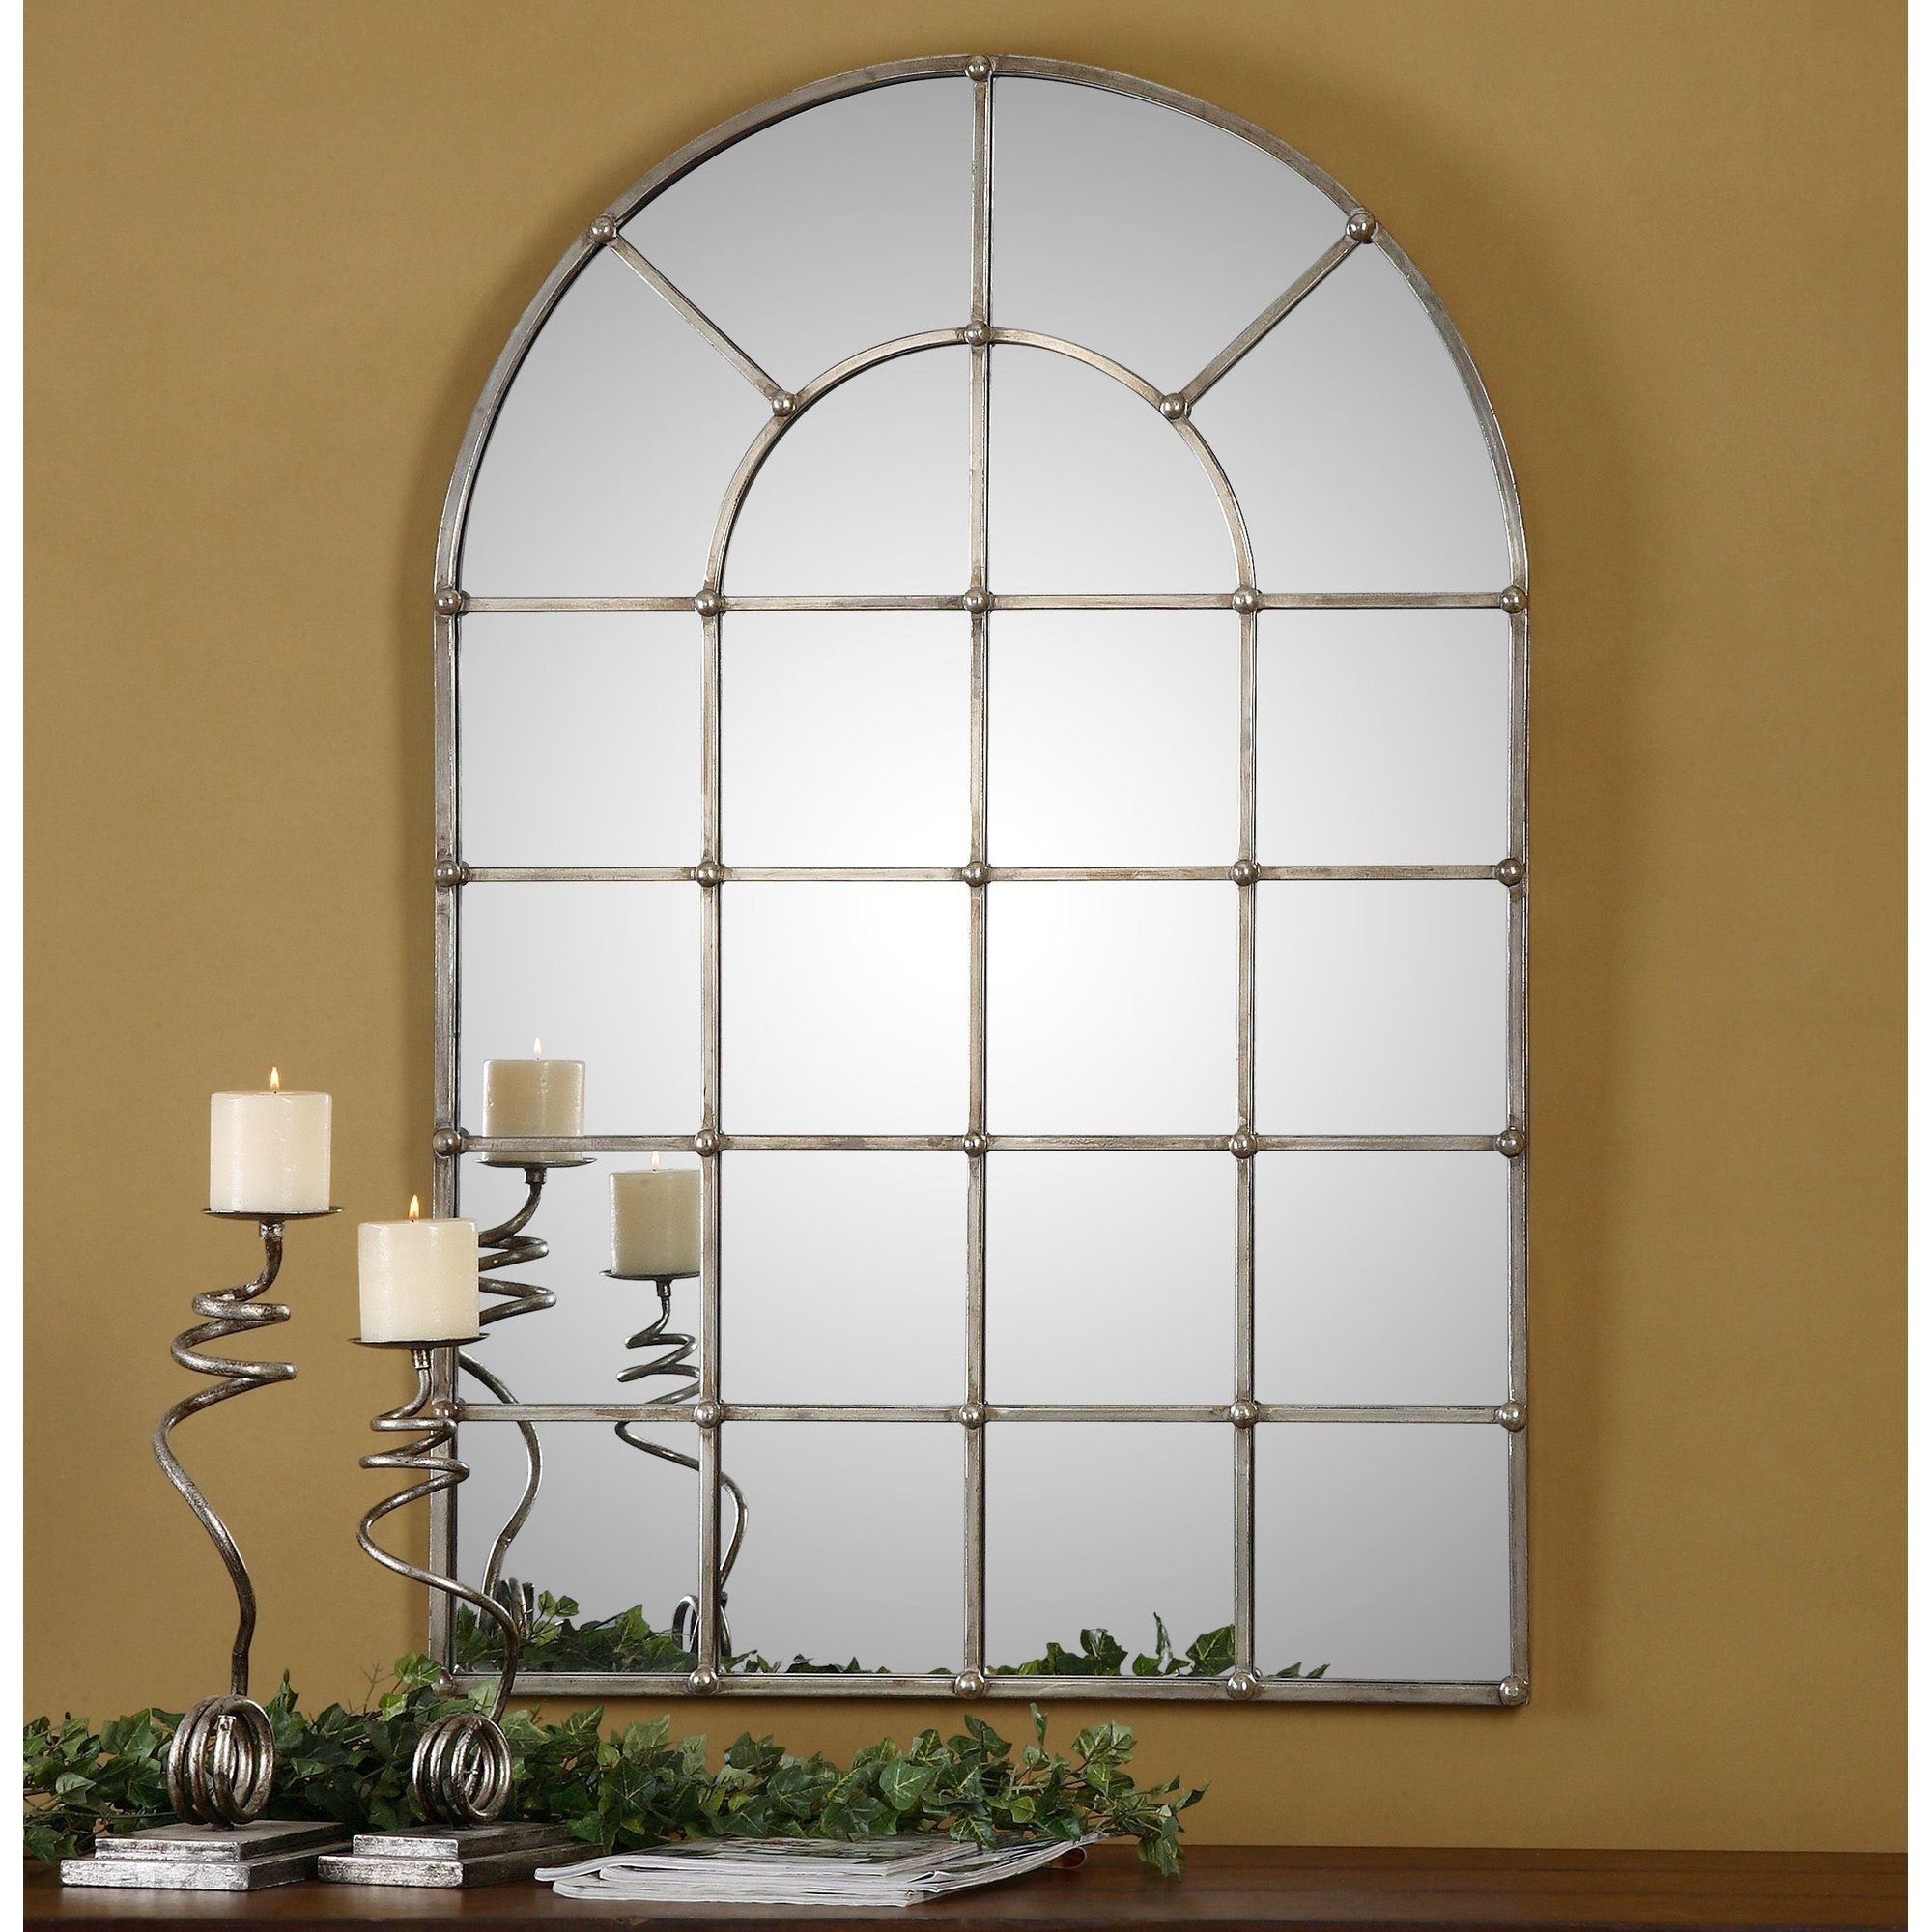 Joanne Arched Oversized Wall Mirror Reviews Joss Main With Regard To Arched Wall Mirror (View 5 of 15)